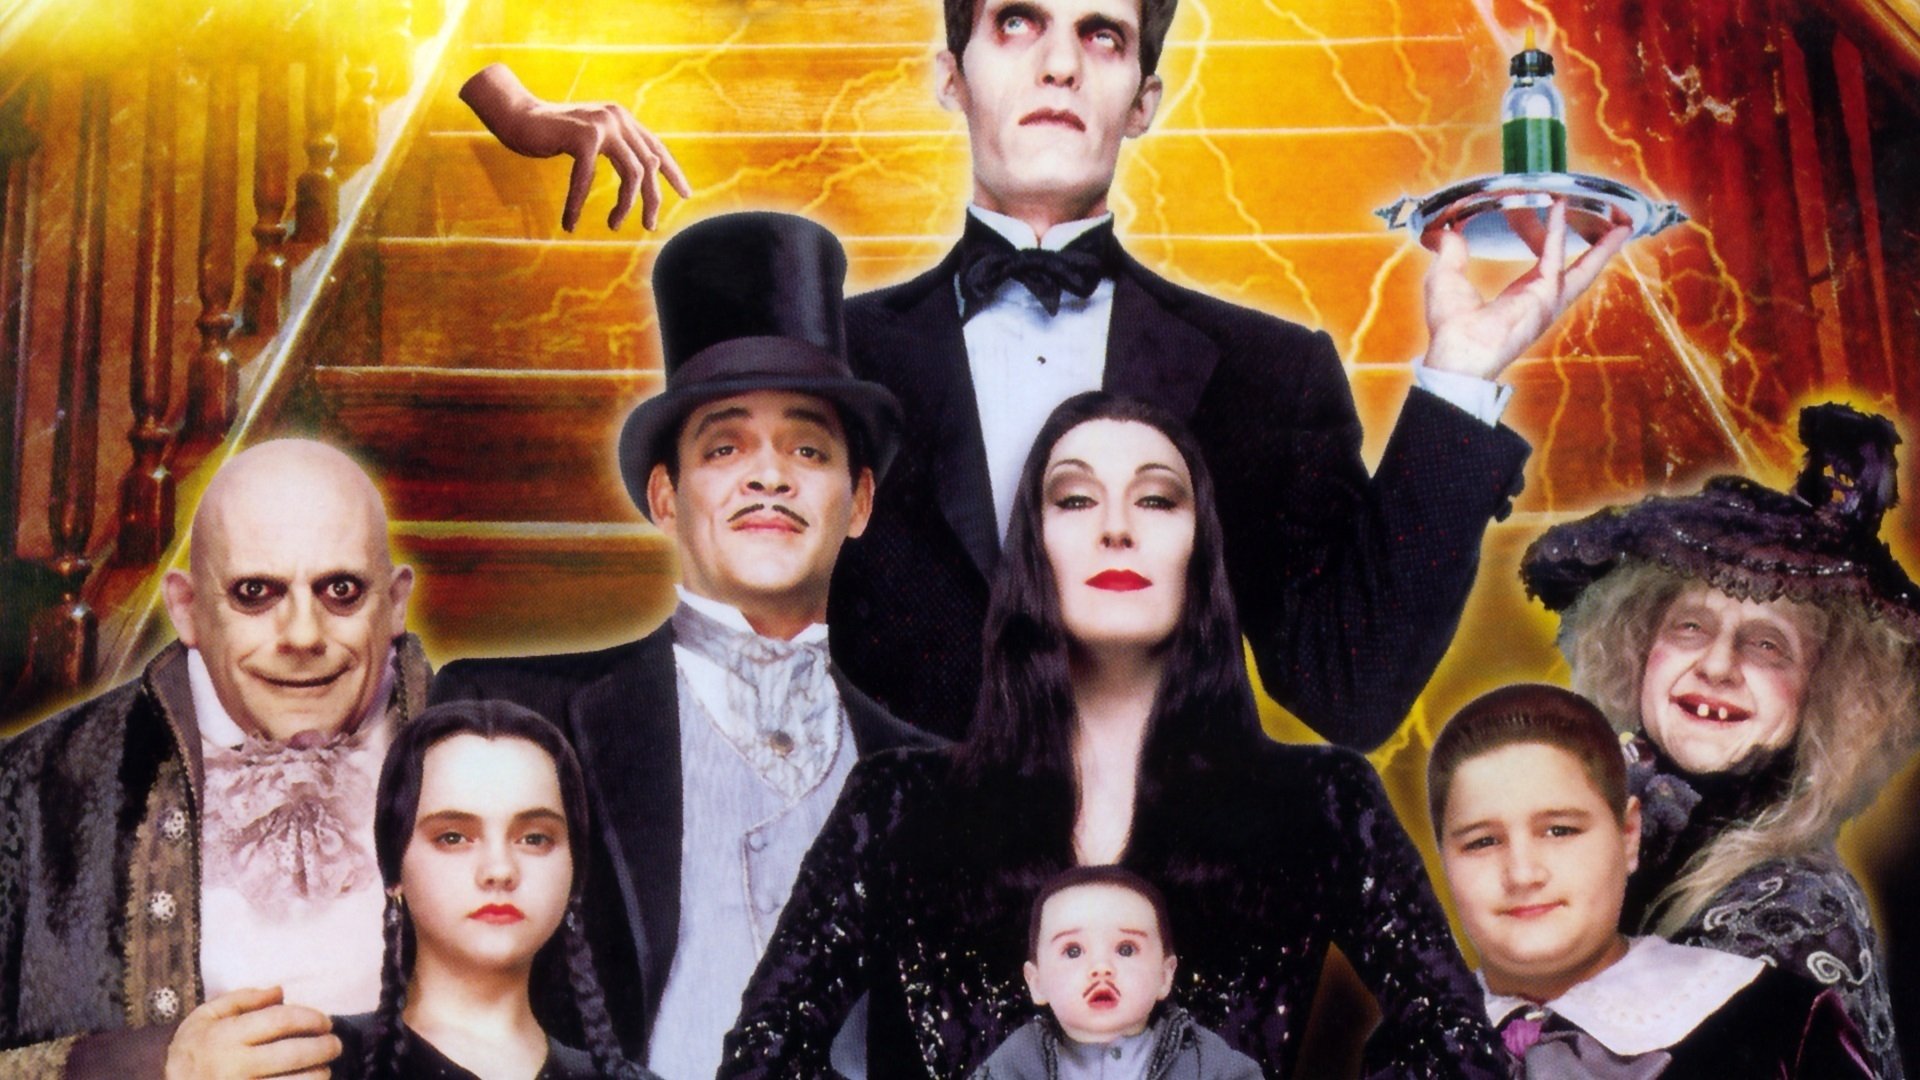 The Addams Family 2 Wallpapers